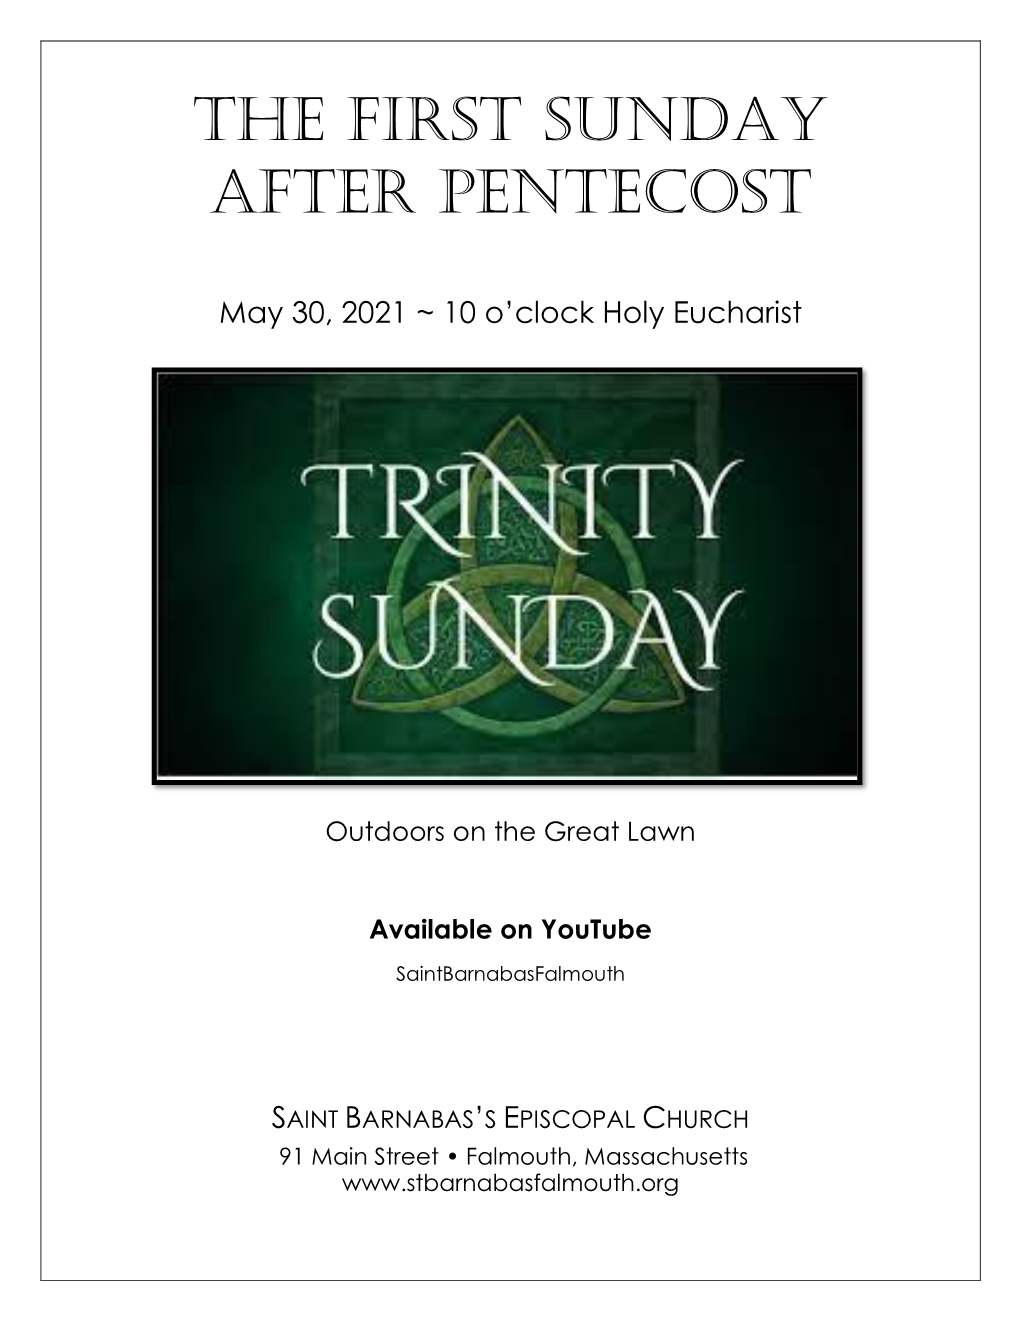 The First Sunday After Pentecost